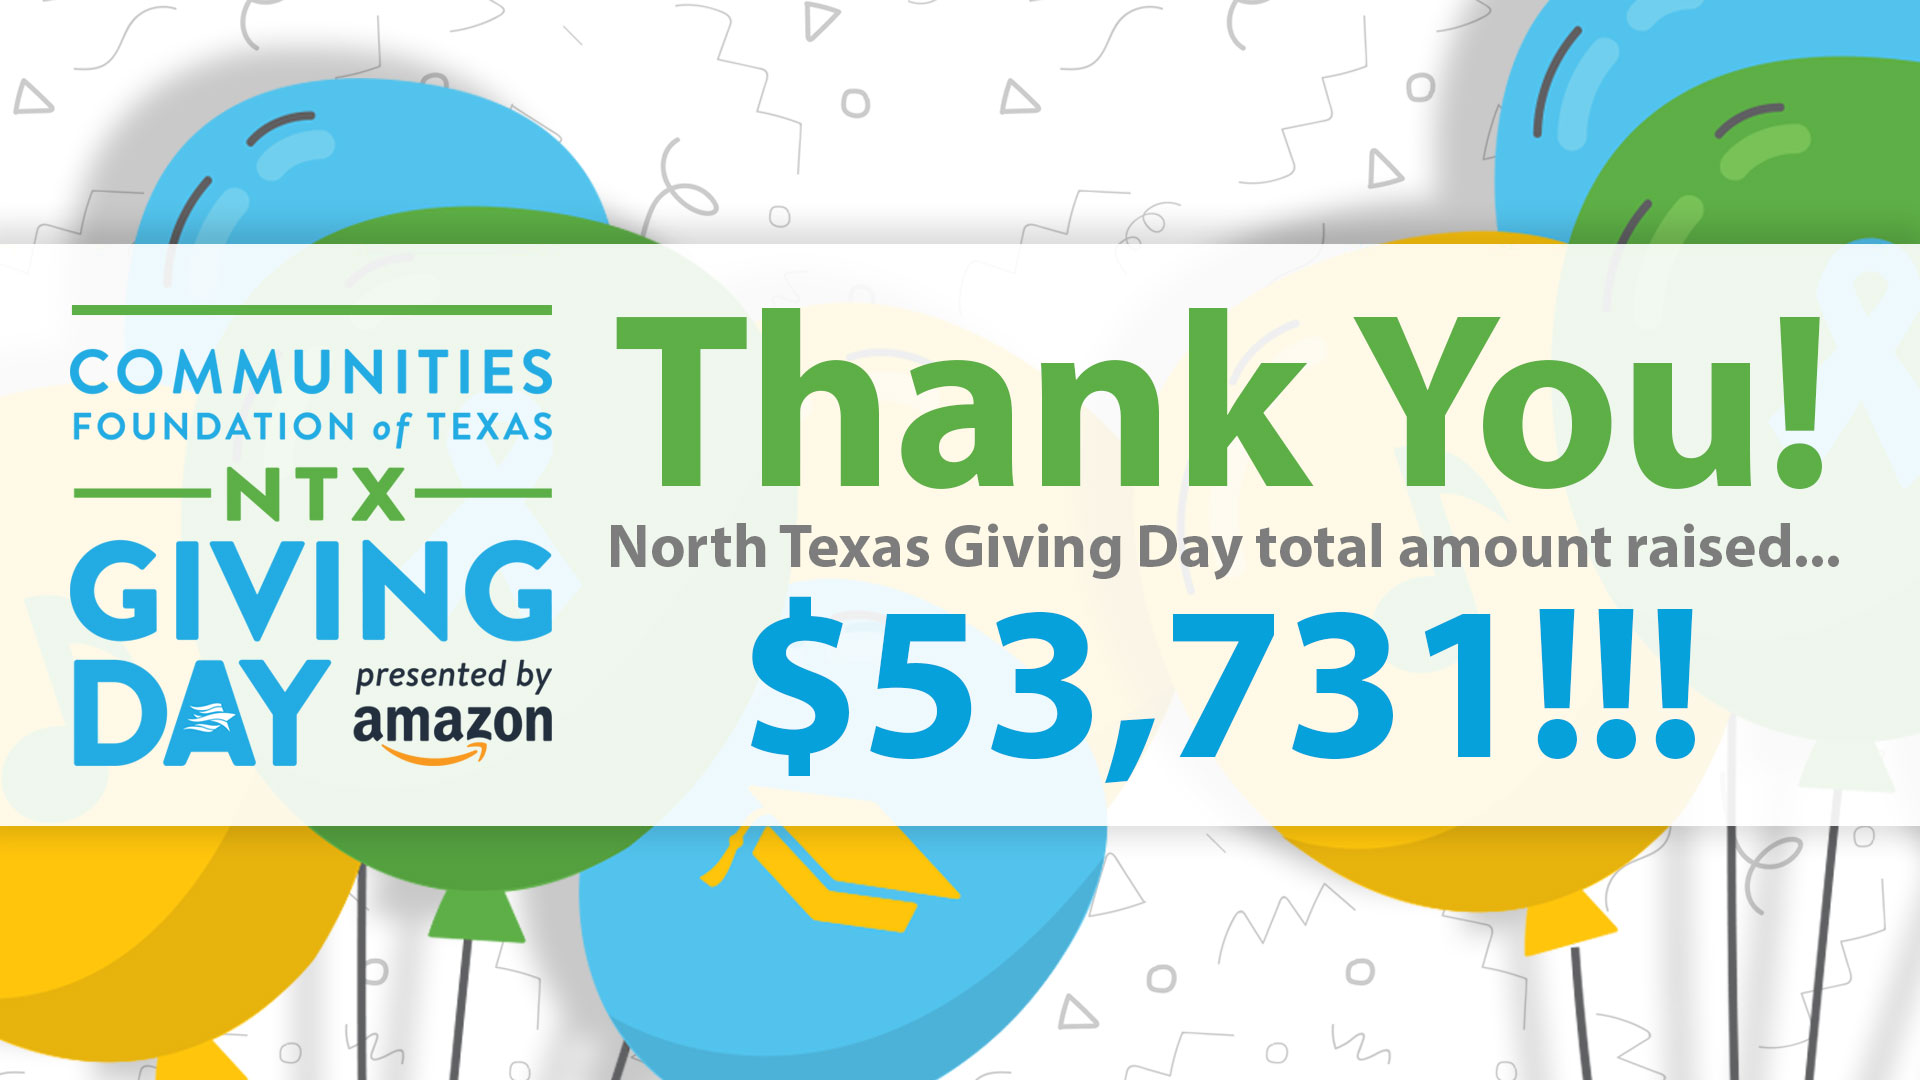 Oasis Center North Texas Giving Day Thank You!